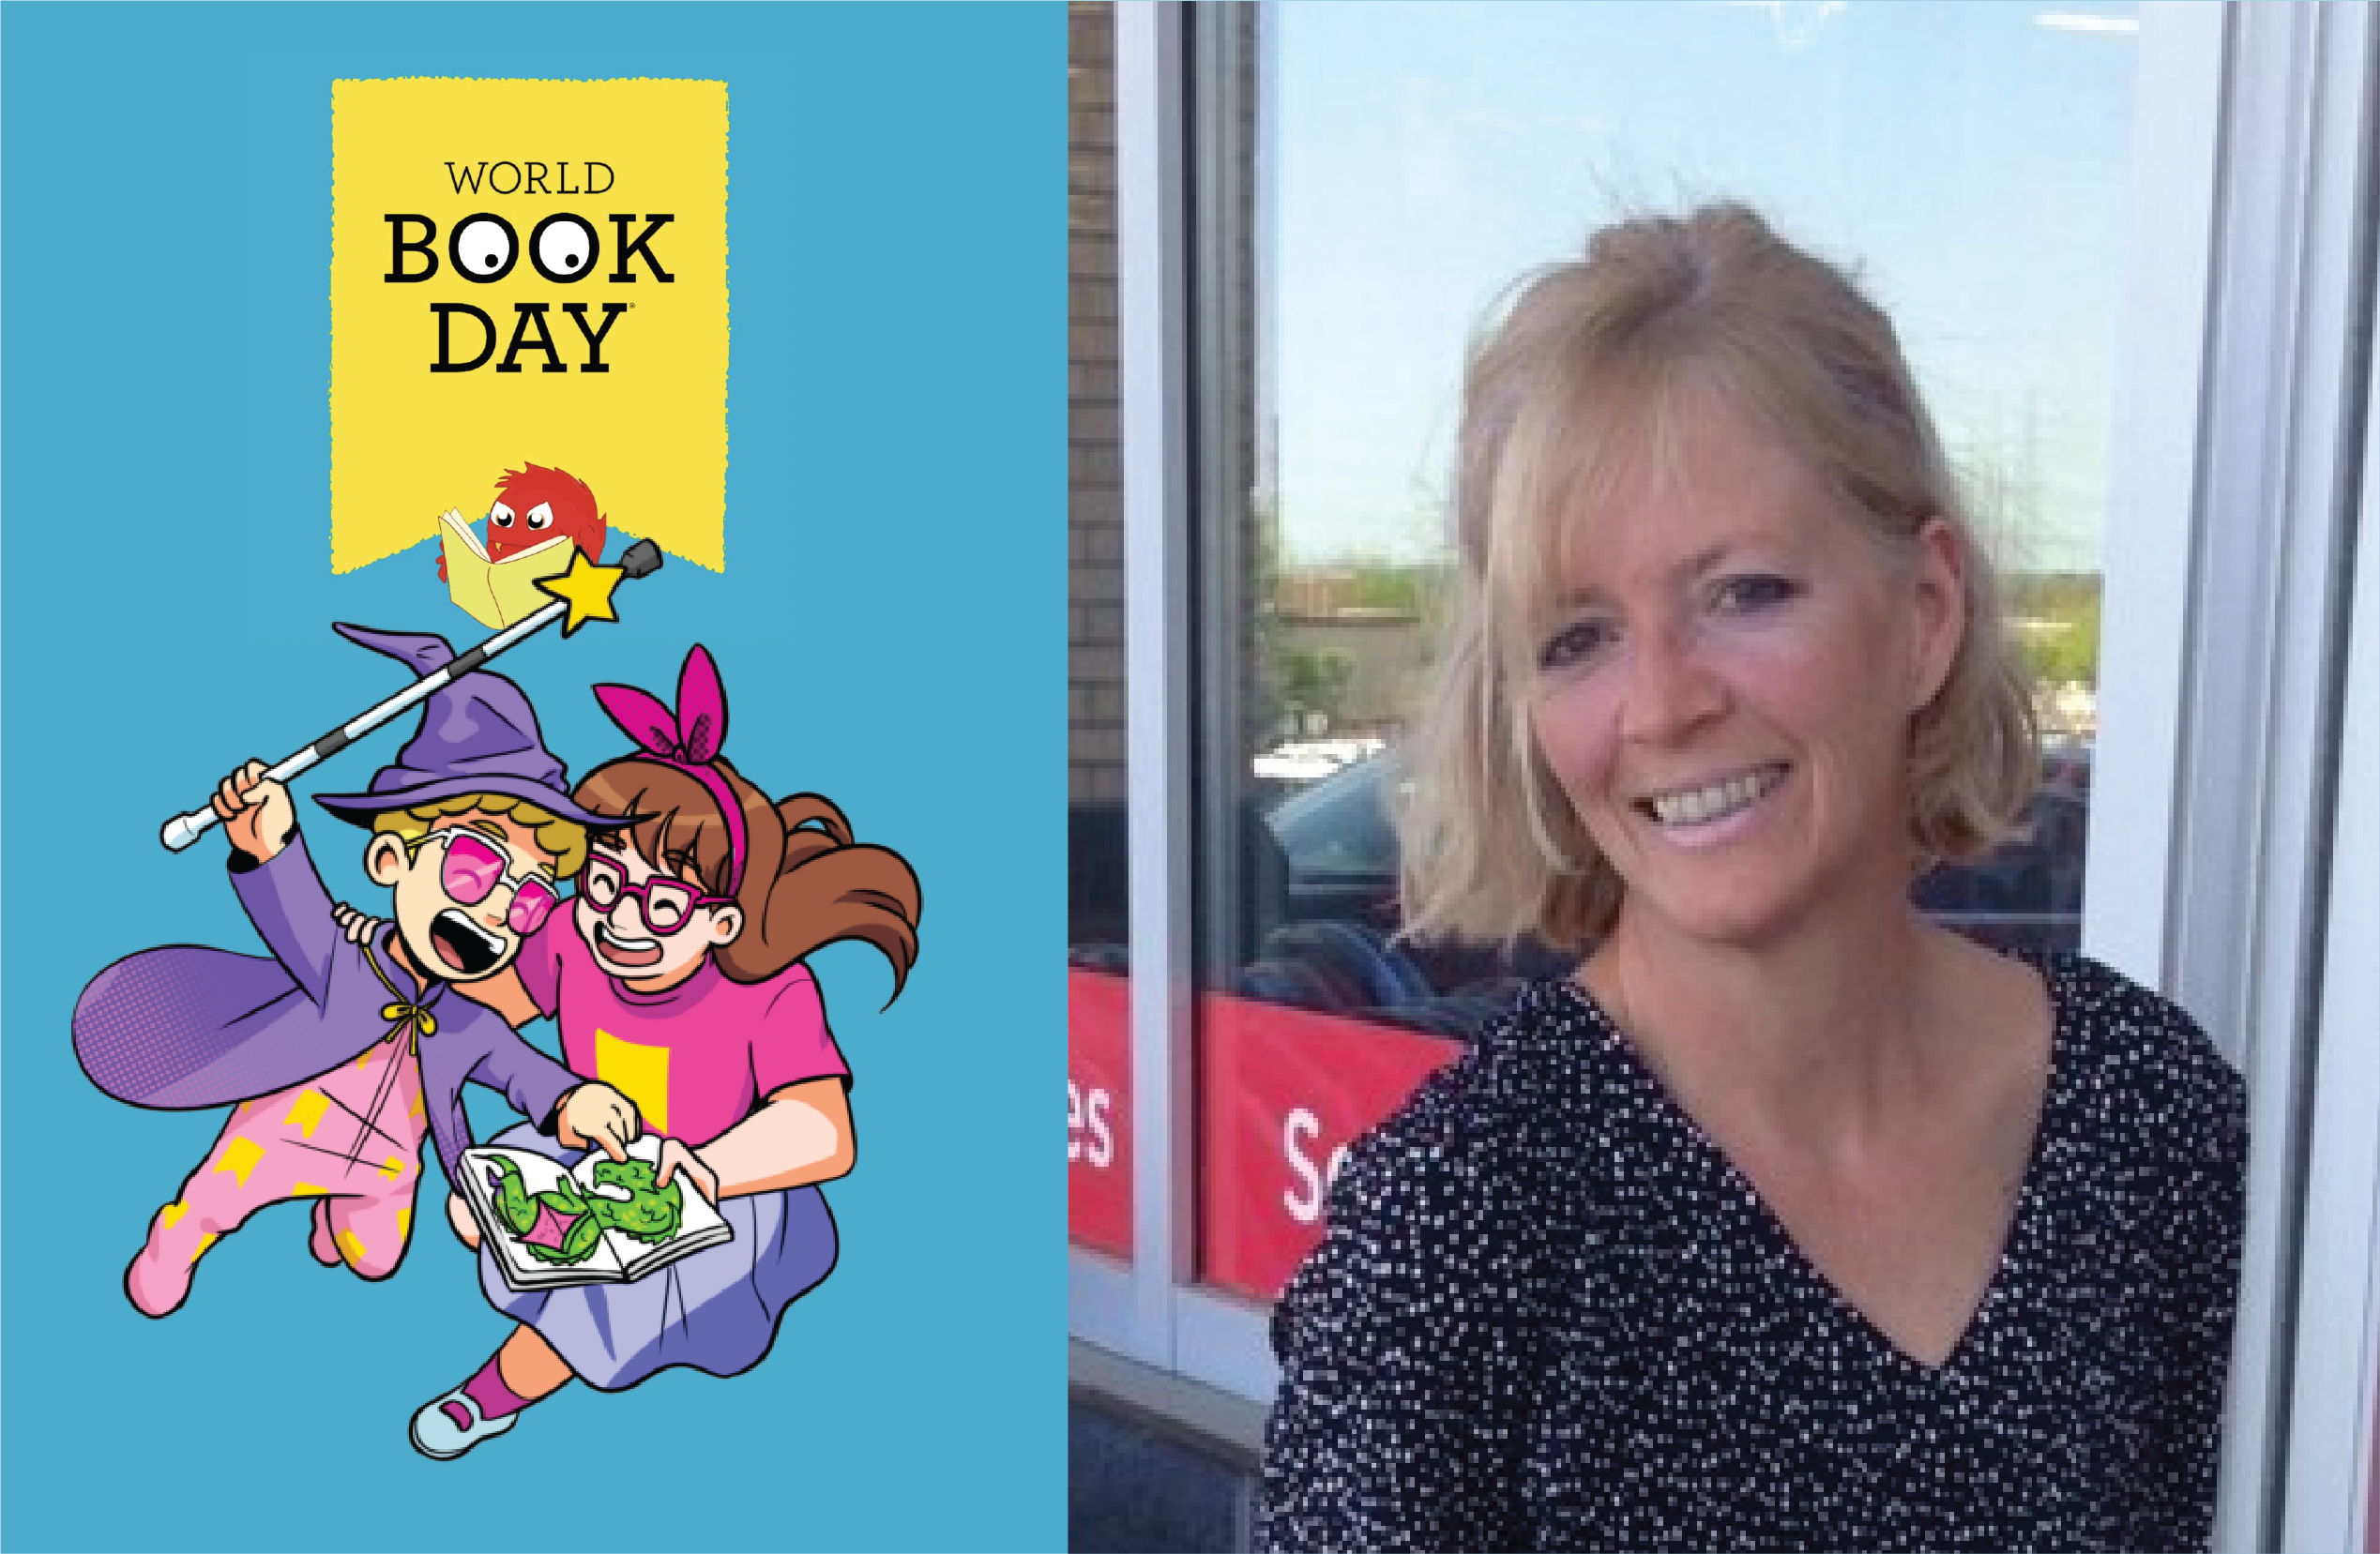 Smiling woman in front of bookstore and comic-like graphic for World Book Day